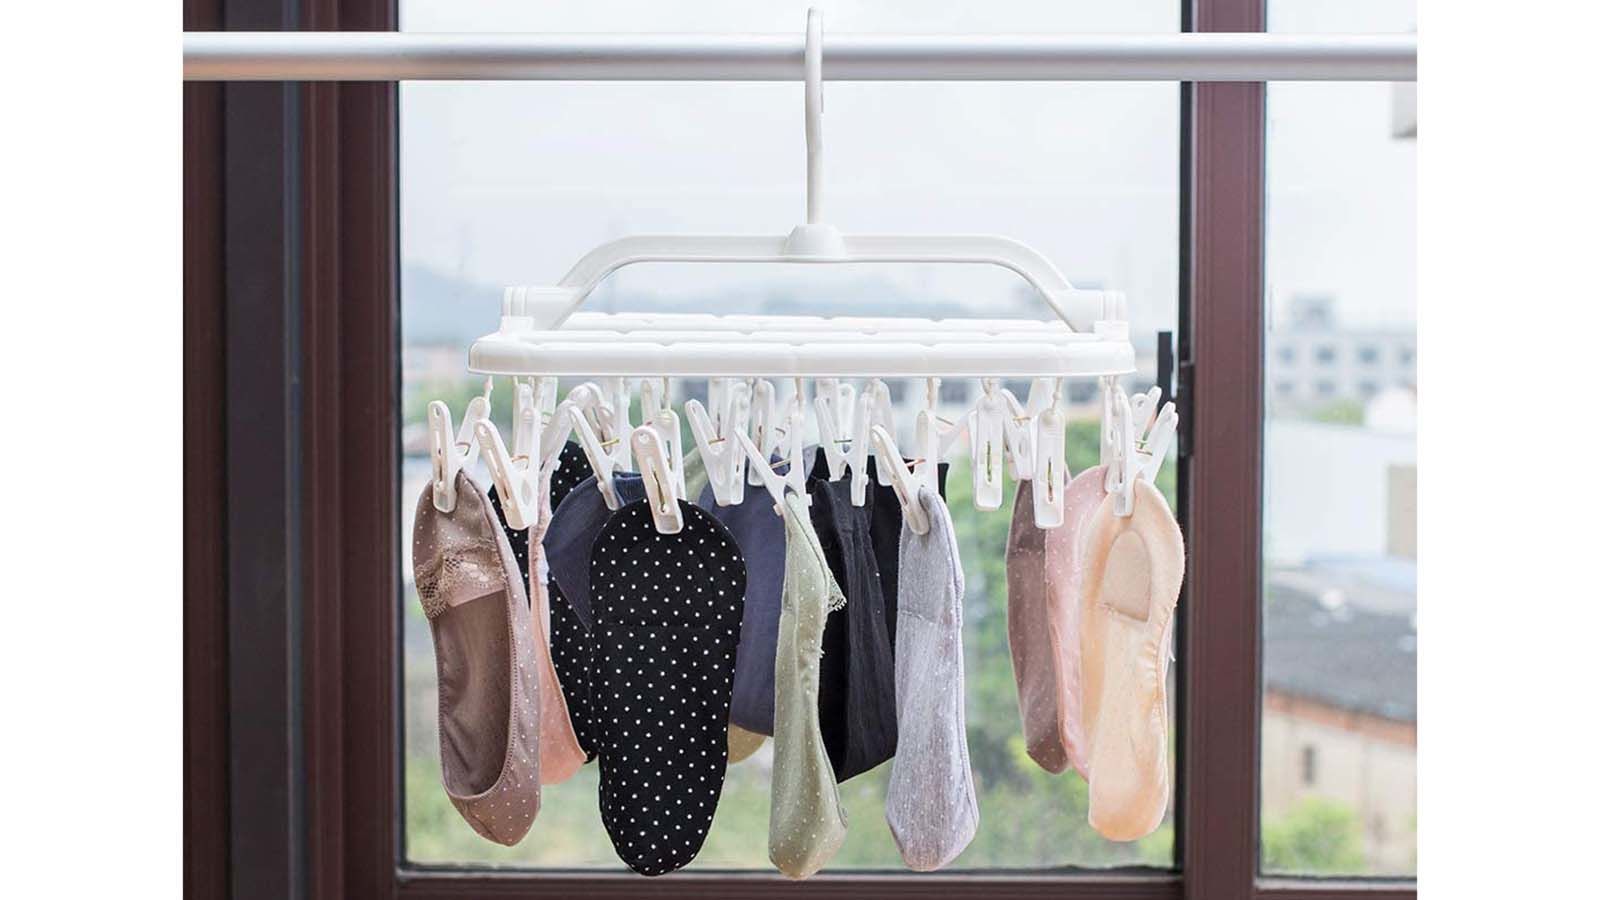 Folding Drying Hanger Folding Clothing Drying Hanger with 24 Windproof  Clips Wall Mount No Drill Bra Brief Towel Bath Loofah Hanging Rack  Organizer Clothes Drying Rack : : Home